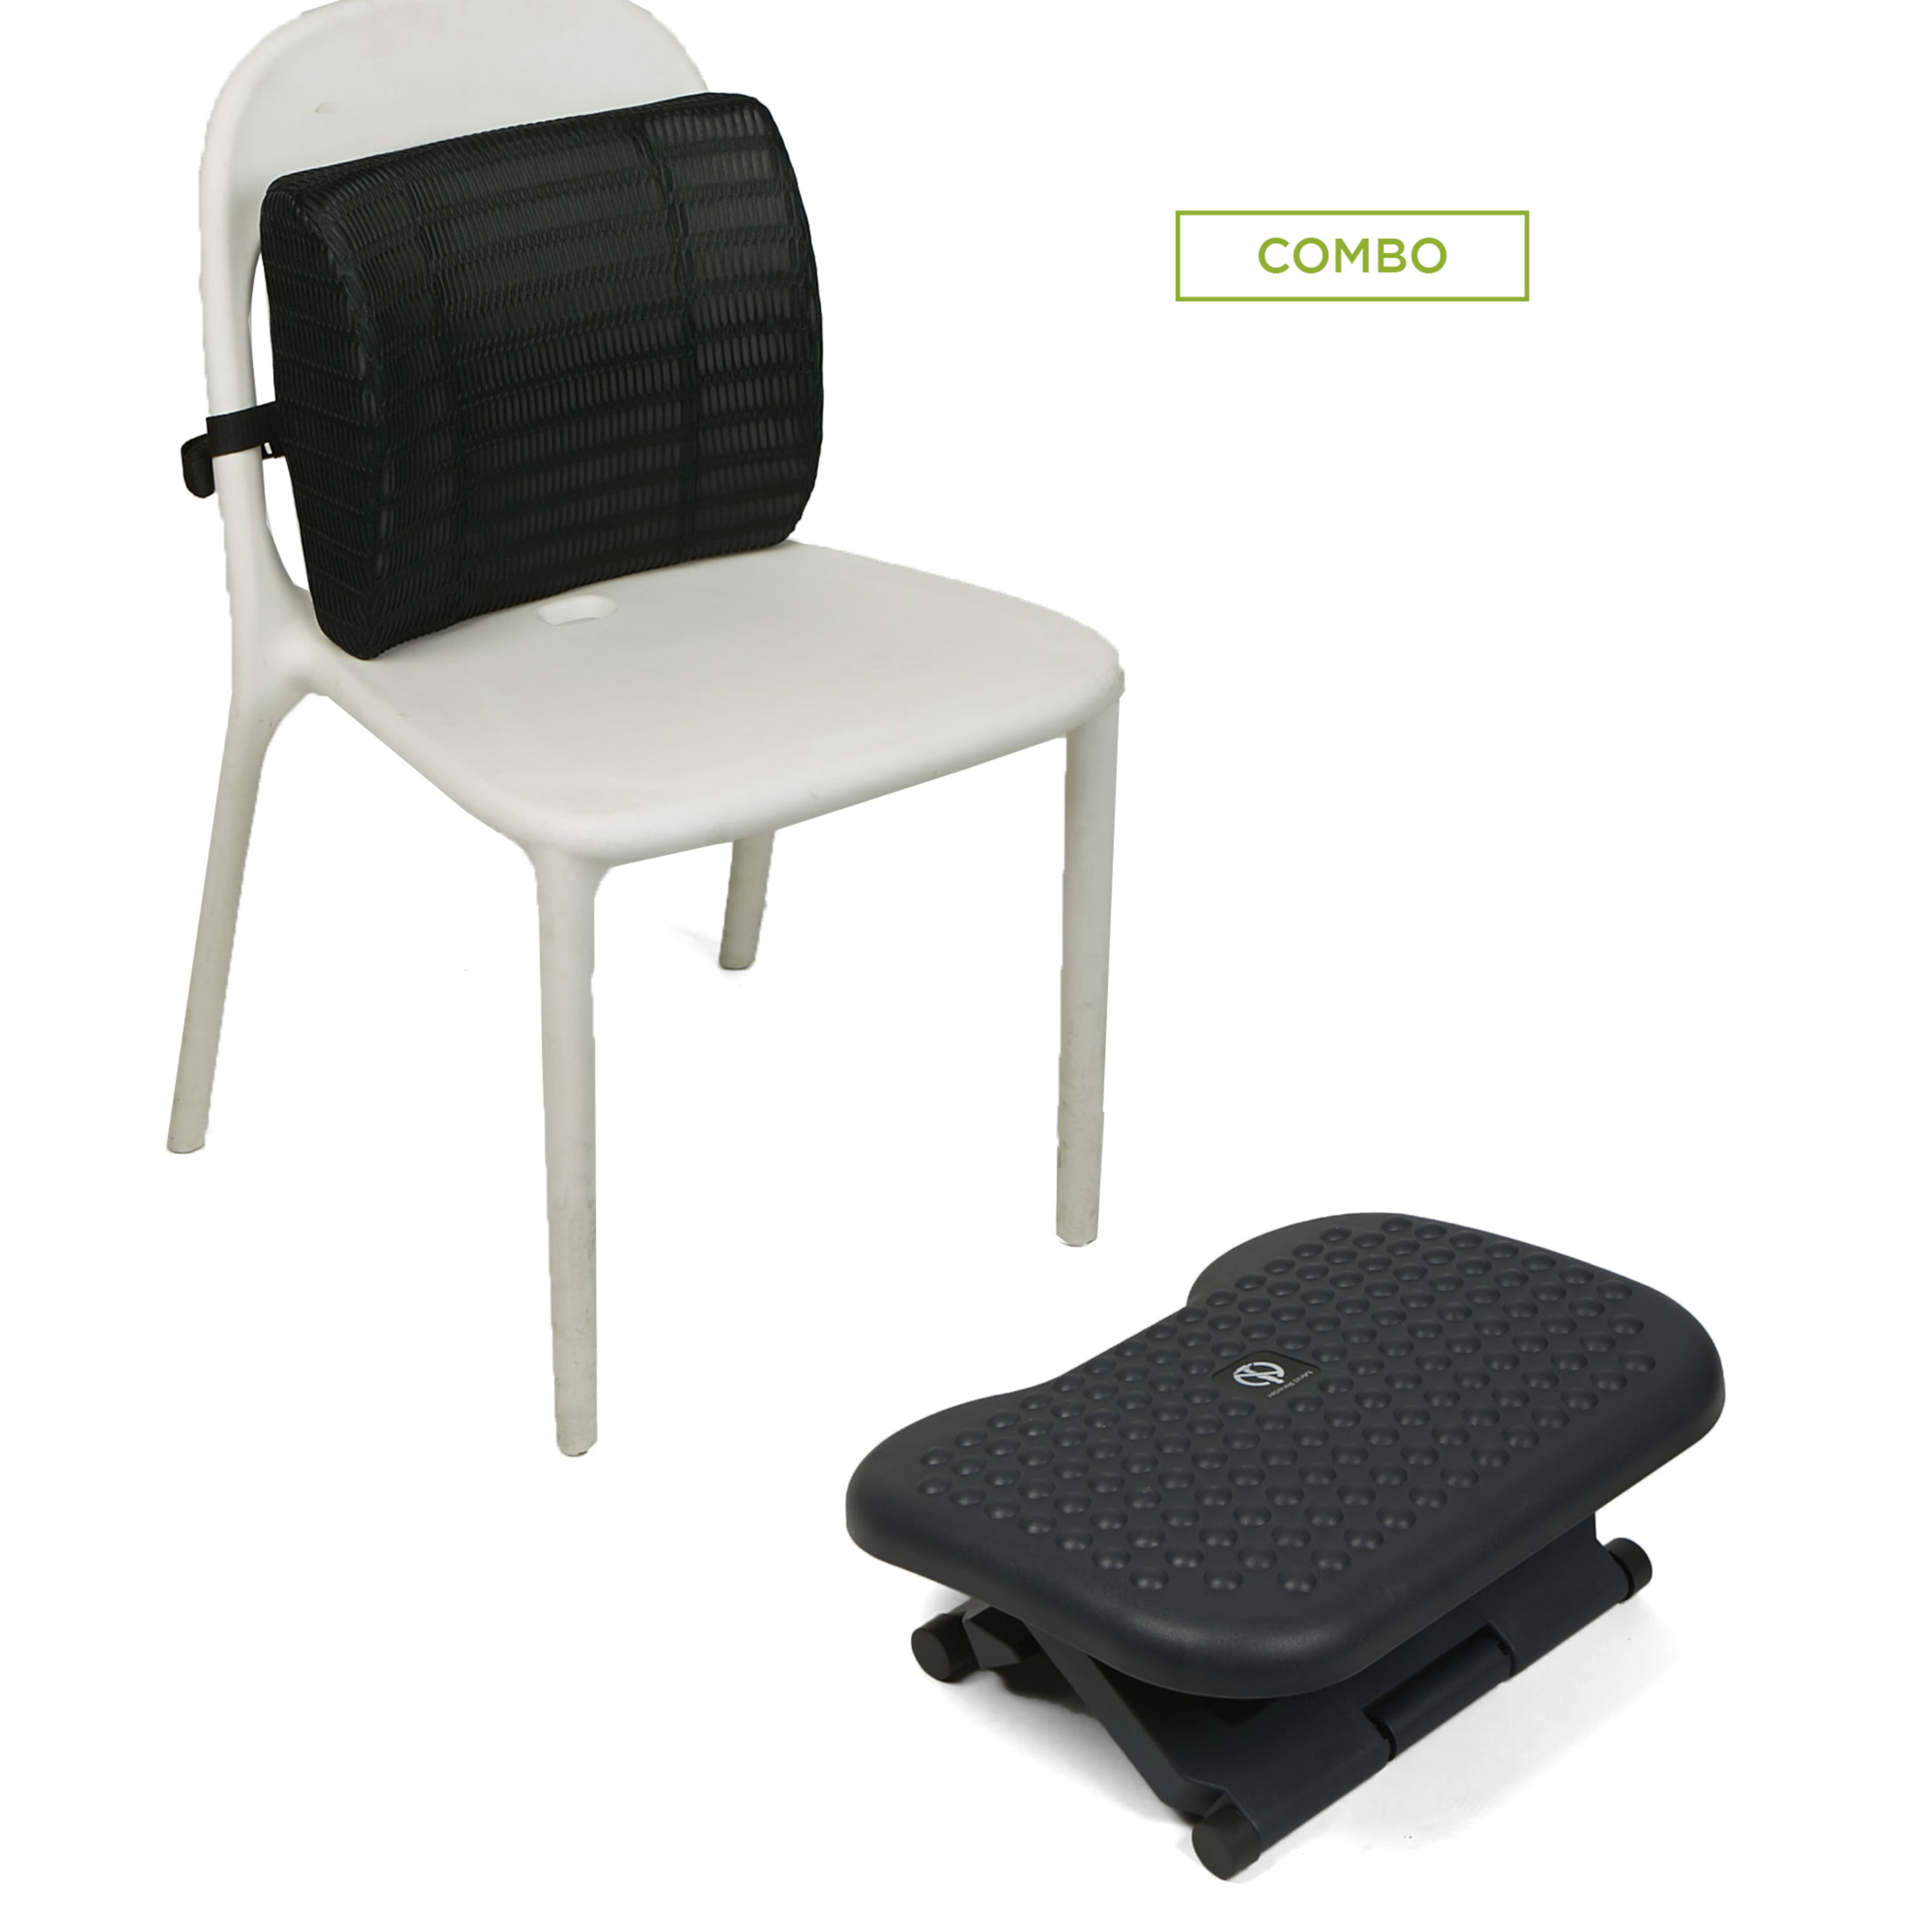 Cubii Cushii - Lumbar Support With Memory Foam Cushion For Back and Lower  Back Pain Relief - It Fits Where You Sit, Desk, Office, Kitchen Chairs